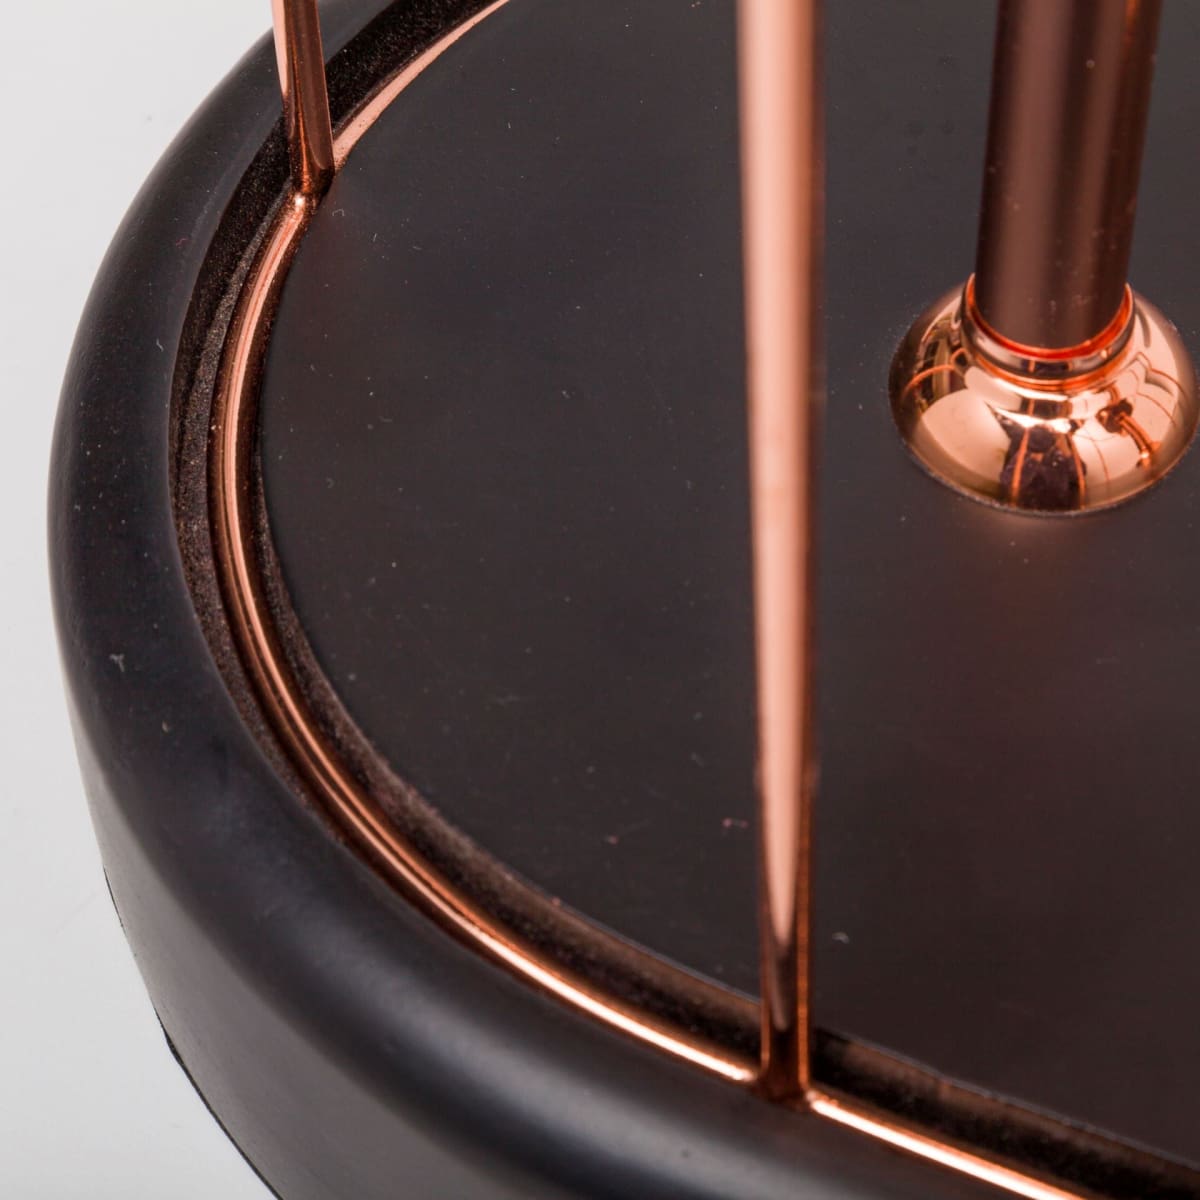 Sutton Table Lamp Rose-Gold Metal - table-lamps